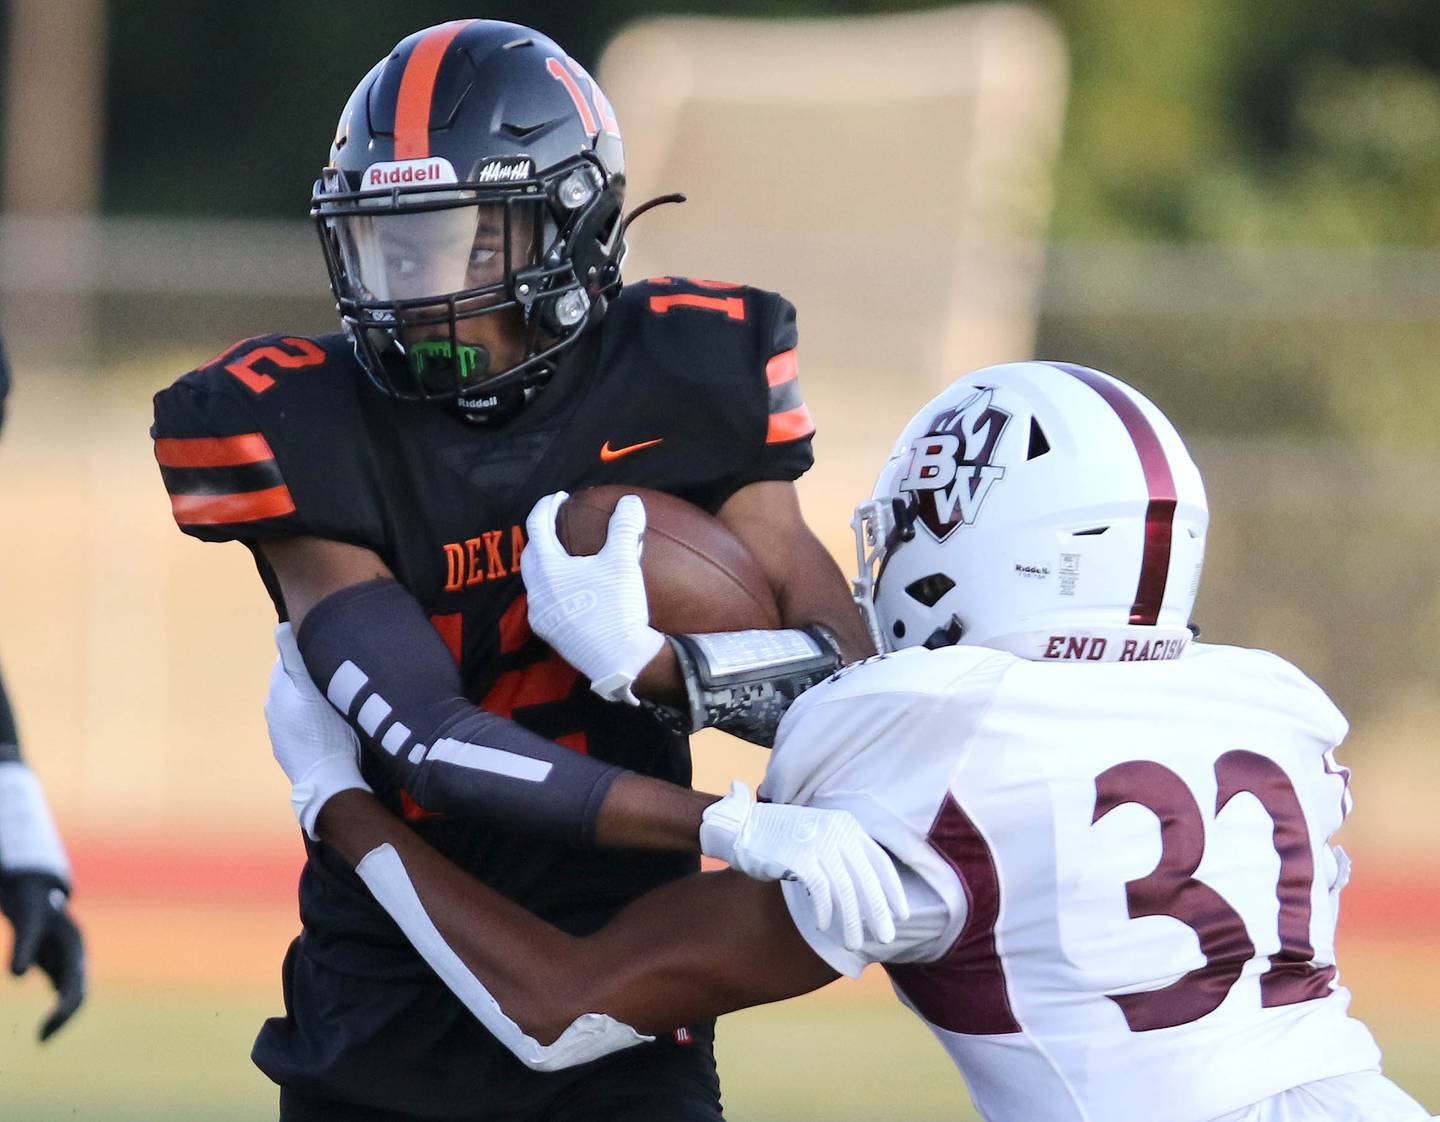 DeKalb wide receiver Ethan McCarter tries to break the tackle of Belleville West's Cameron Thurston during their game Friday, Sep. 10, 2021 at DeKalb High School.